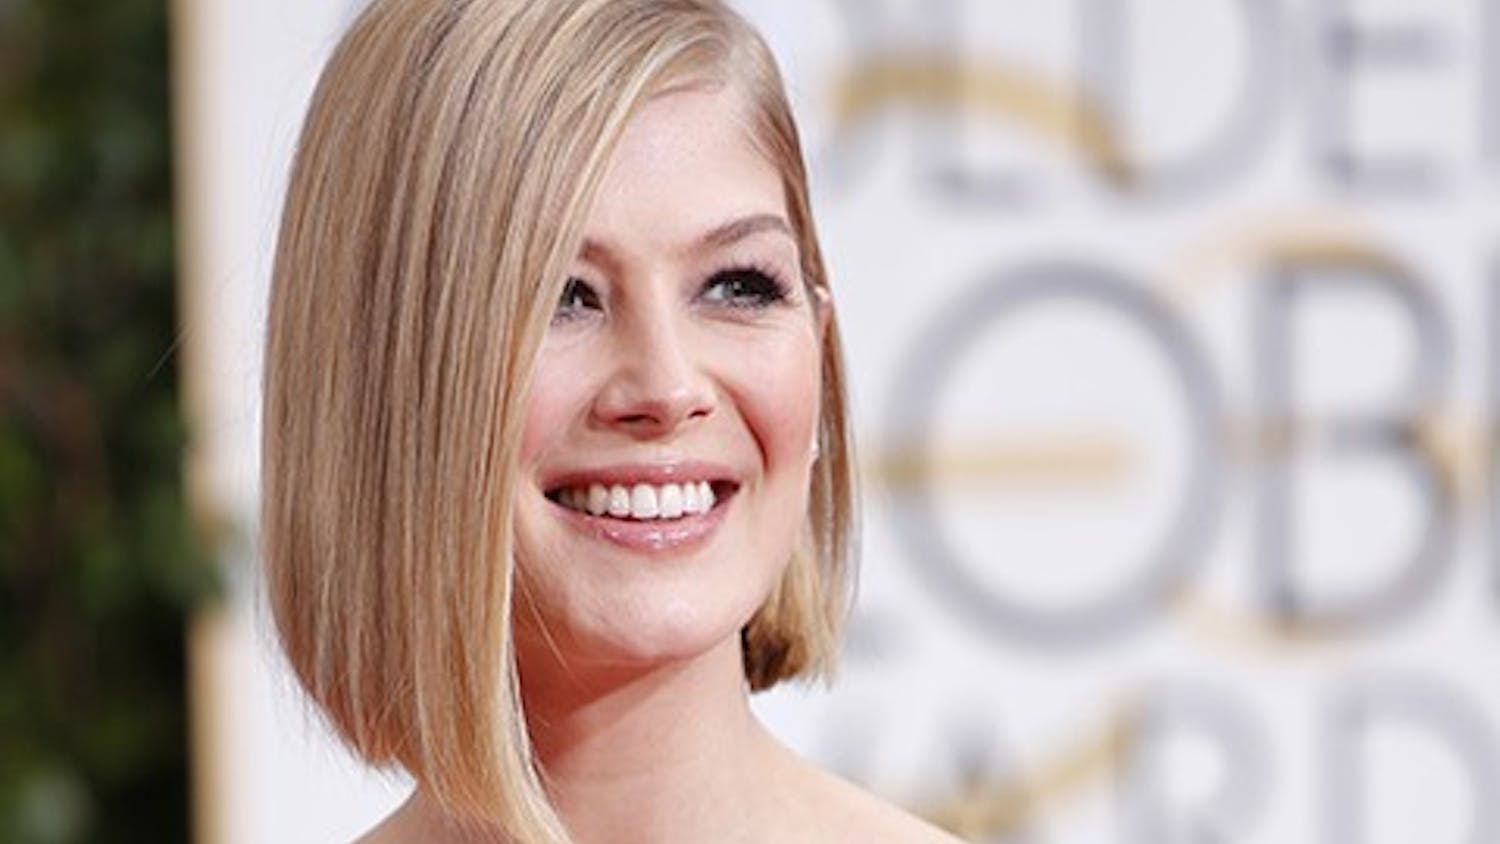 Rosamund Pike arrives at the 72nd Annual Golden Globe Awards show at the Beverly Hilton Hotel in Beverly Hills, Calif., on Sunday, Jan. 11, 2015. (Jay L. Clendenin/Los Angeles Times/TNS)